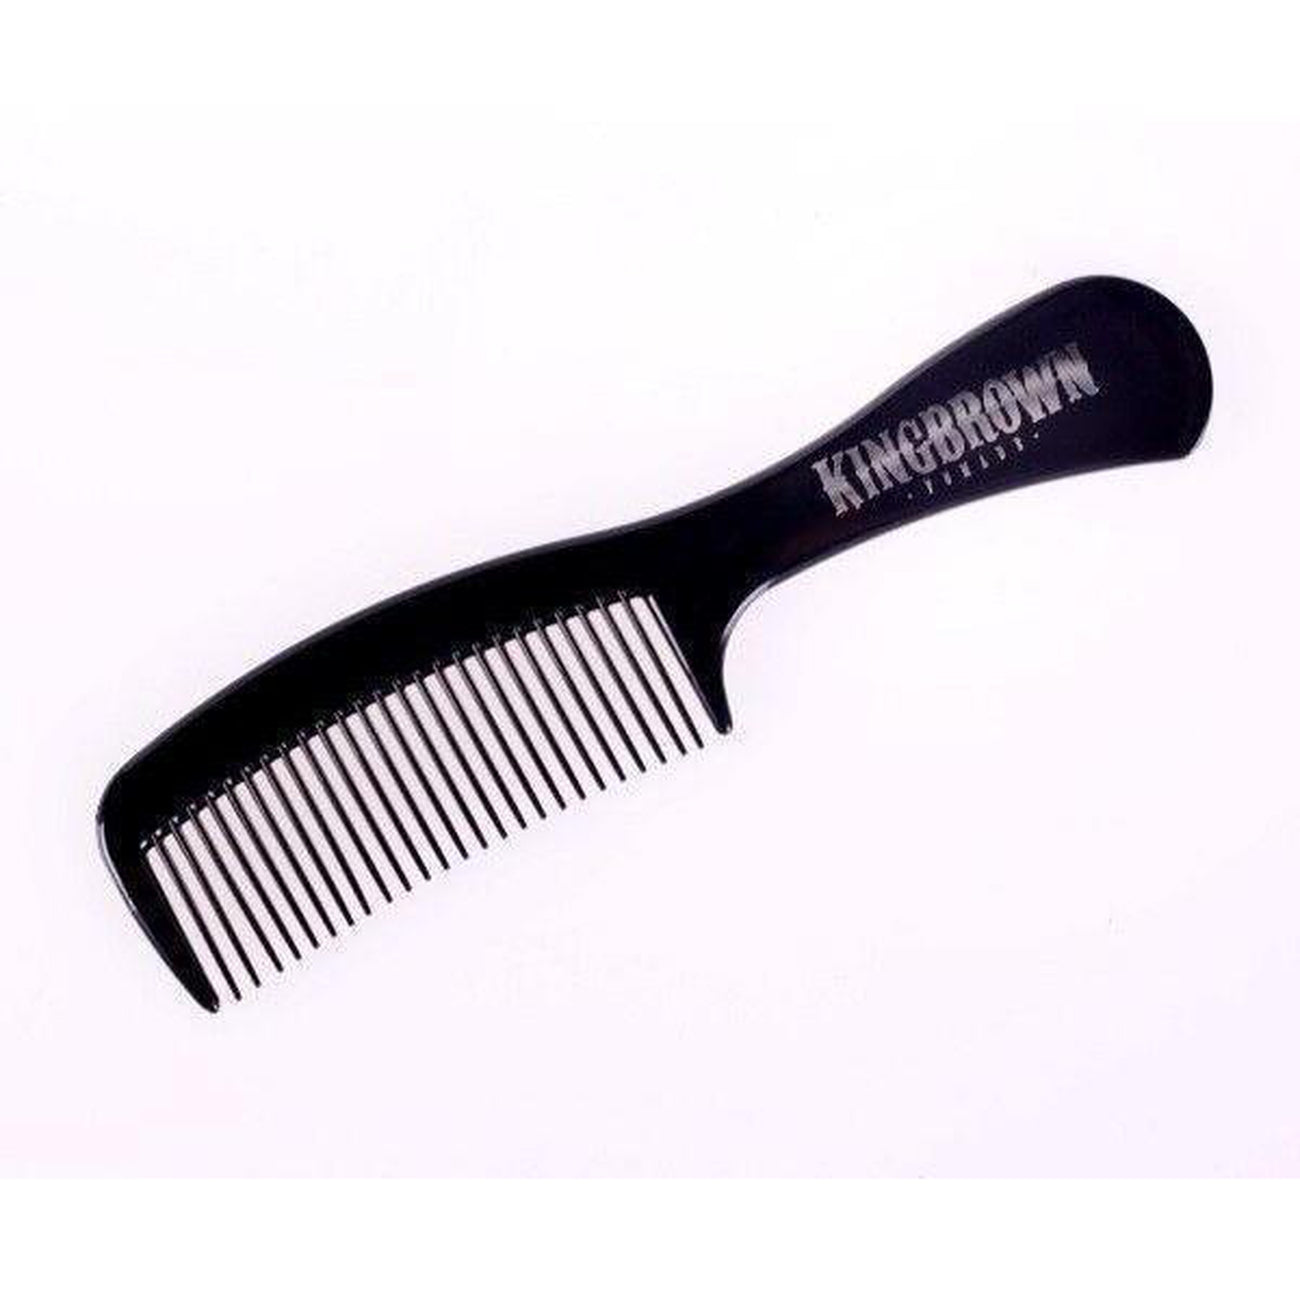 King Brown Black Handle Comb-The Pomade Shop